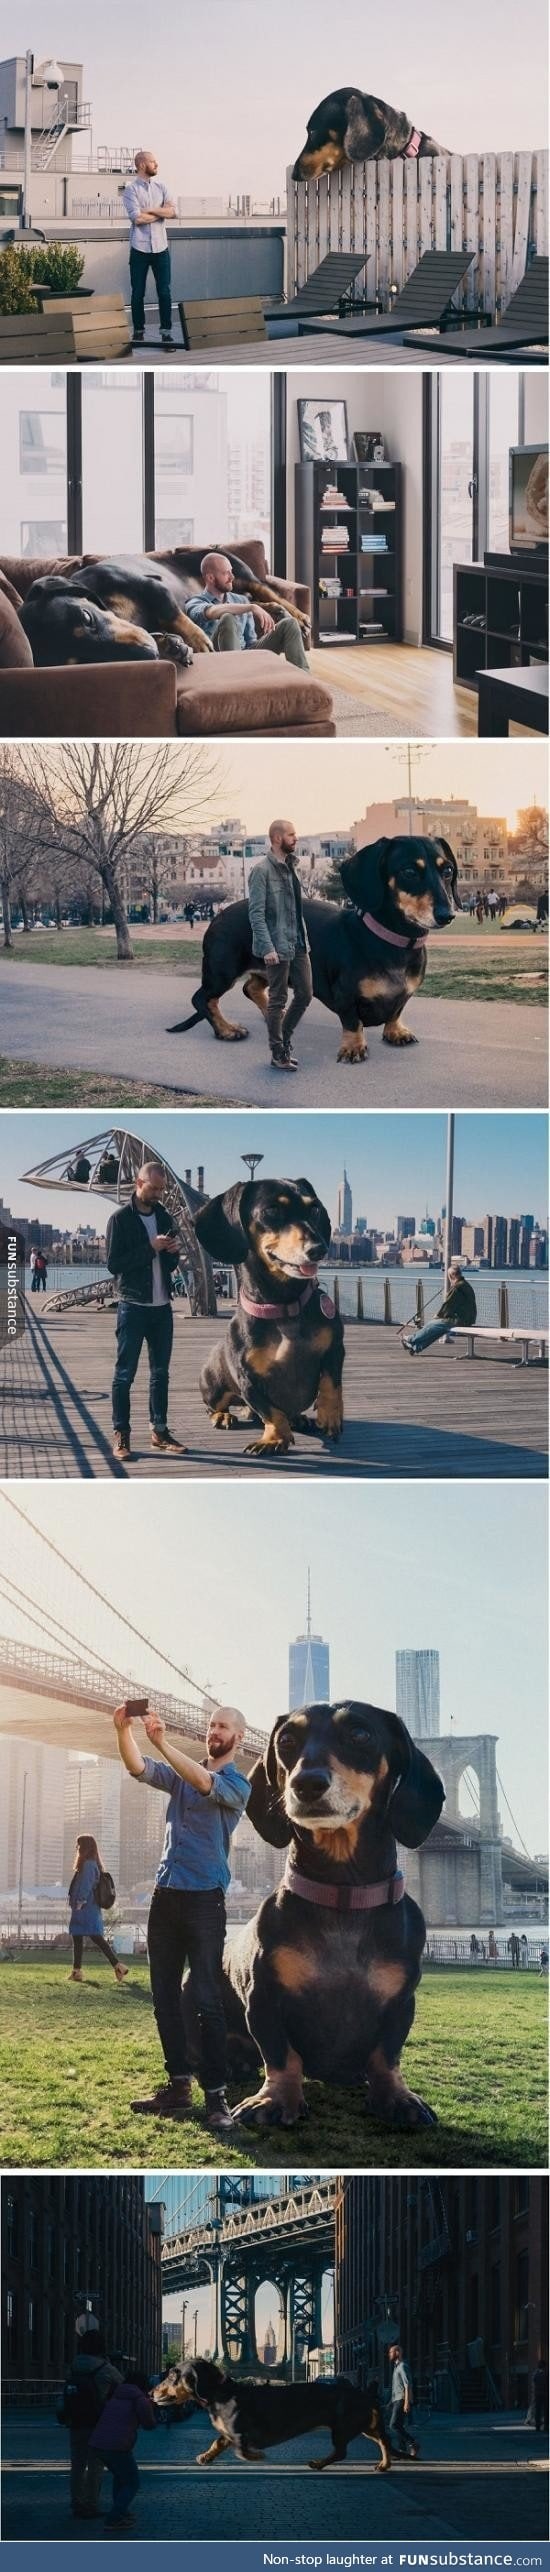 Photoshoping dog into a giant